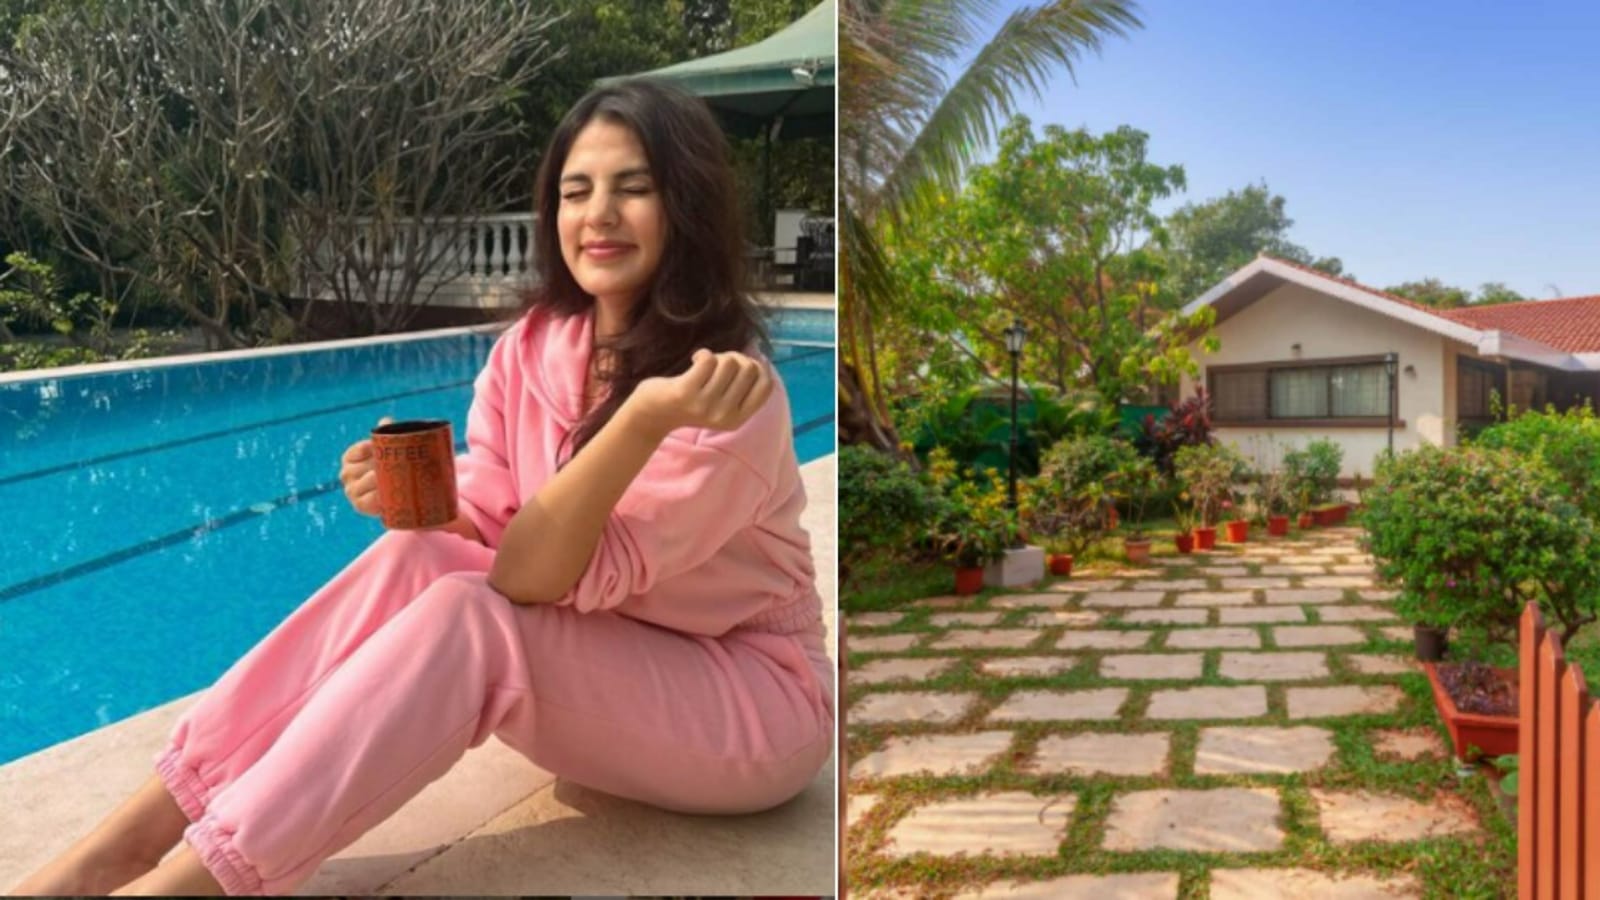 Rhea Chakraborty enjoys luxurious vacation in Alibaug, take a tour of her villa with swimming pool, mango orchards - Hindustan Times